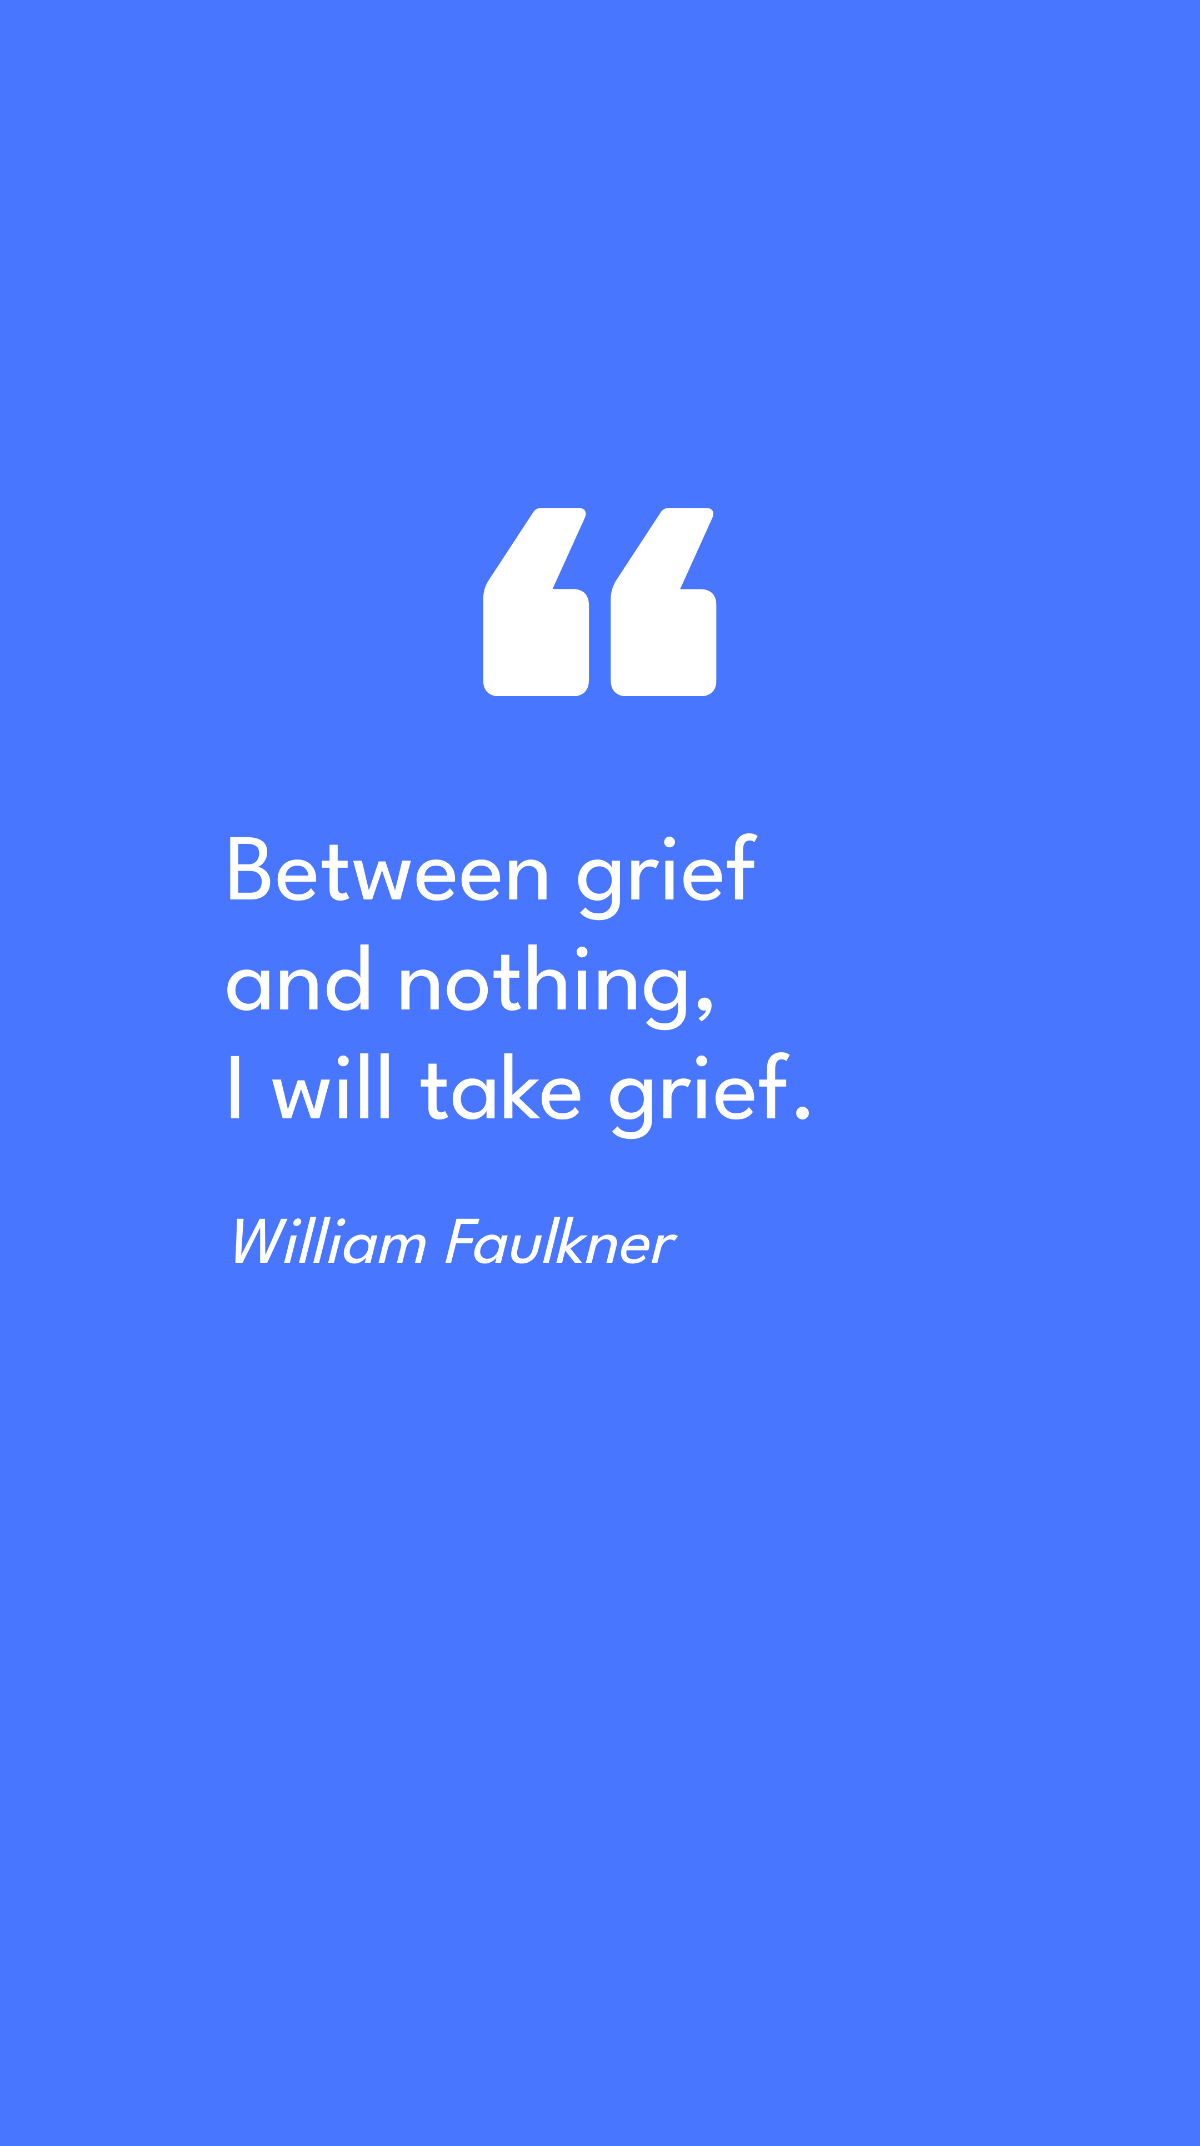 William Faulkner - Between grief and nothing, I will take grief. Template